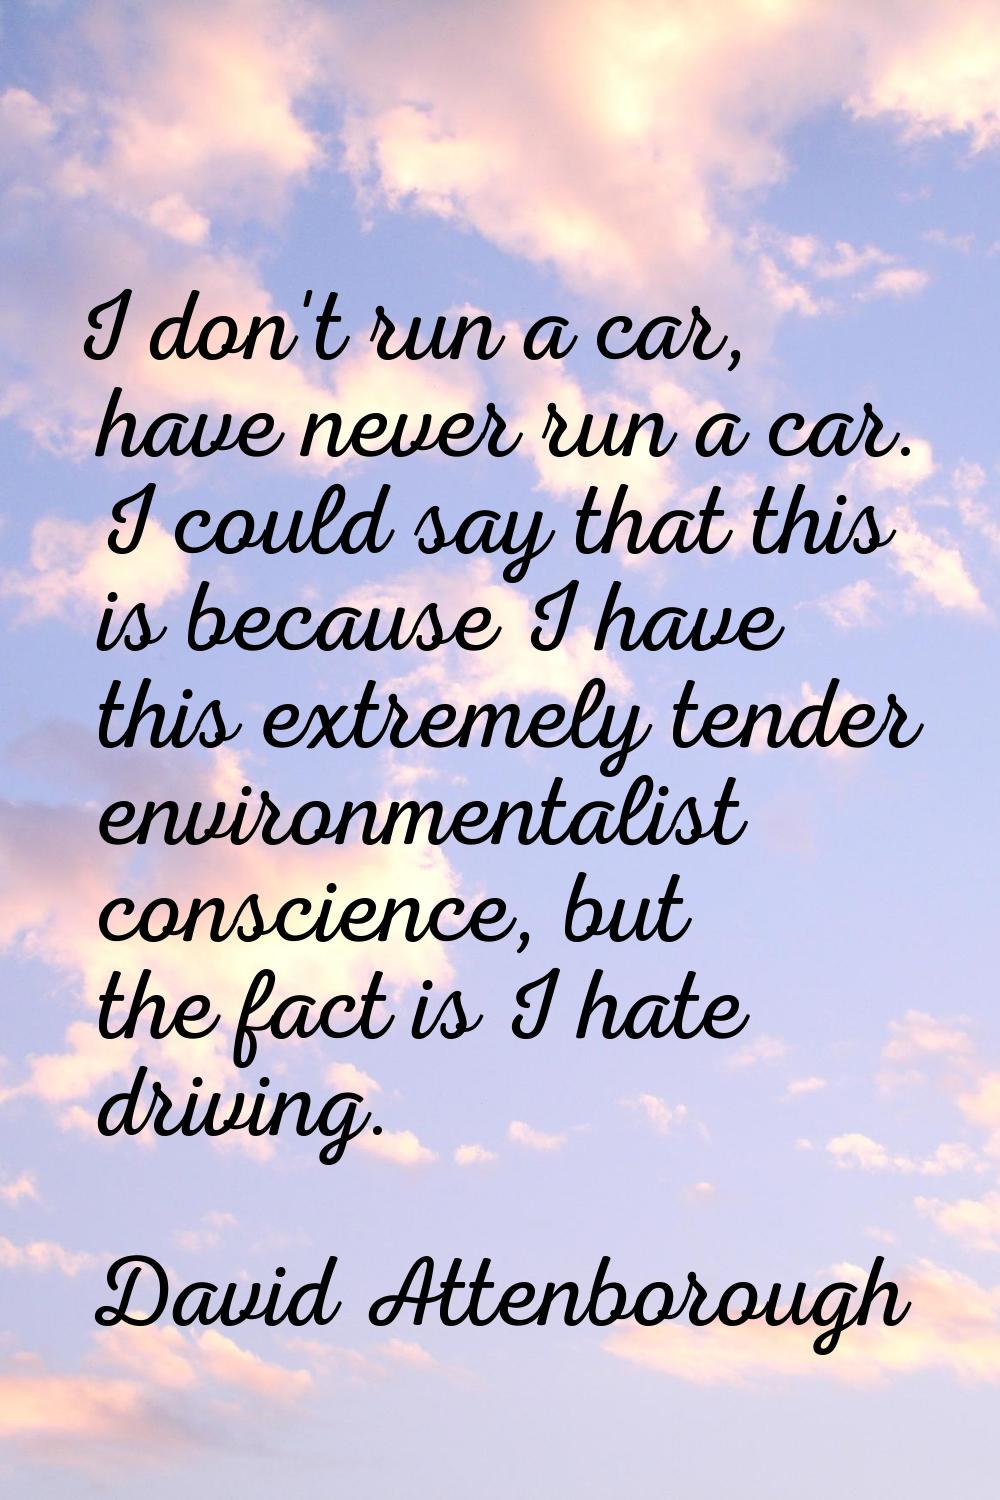 I don't run a car, have never run a car. I could say that this is because I have this extremely ten